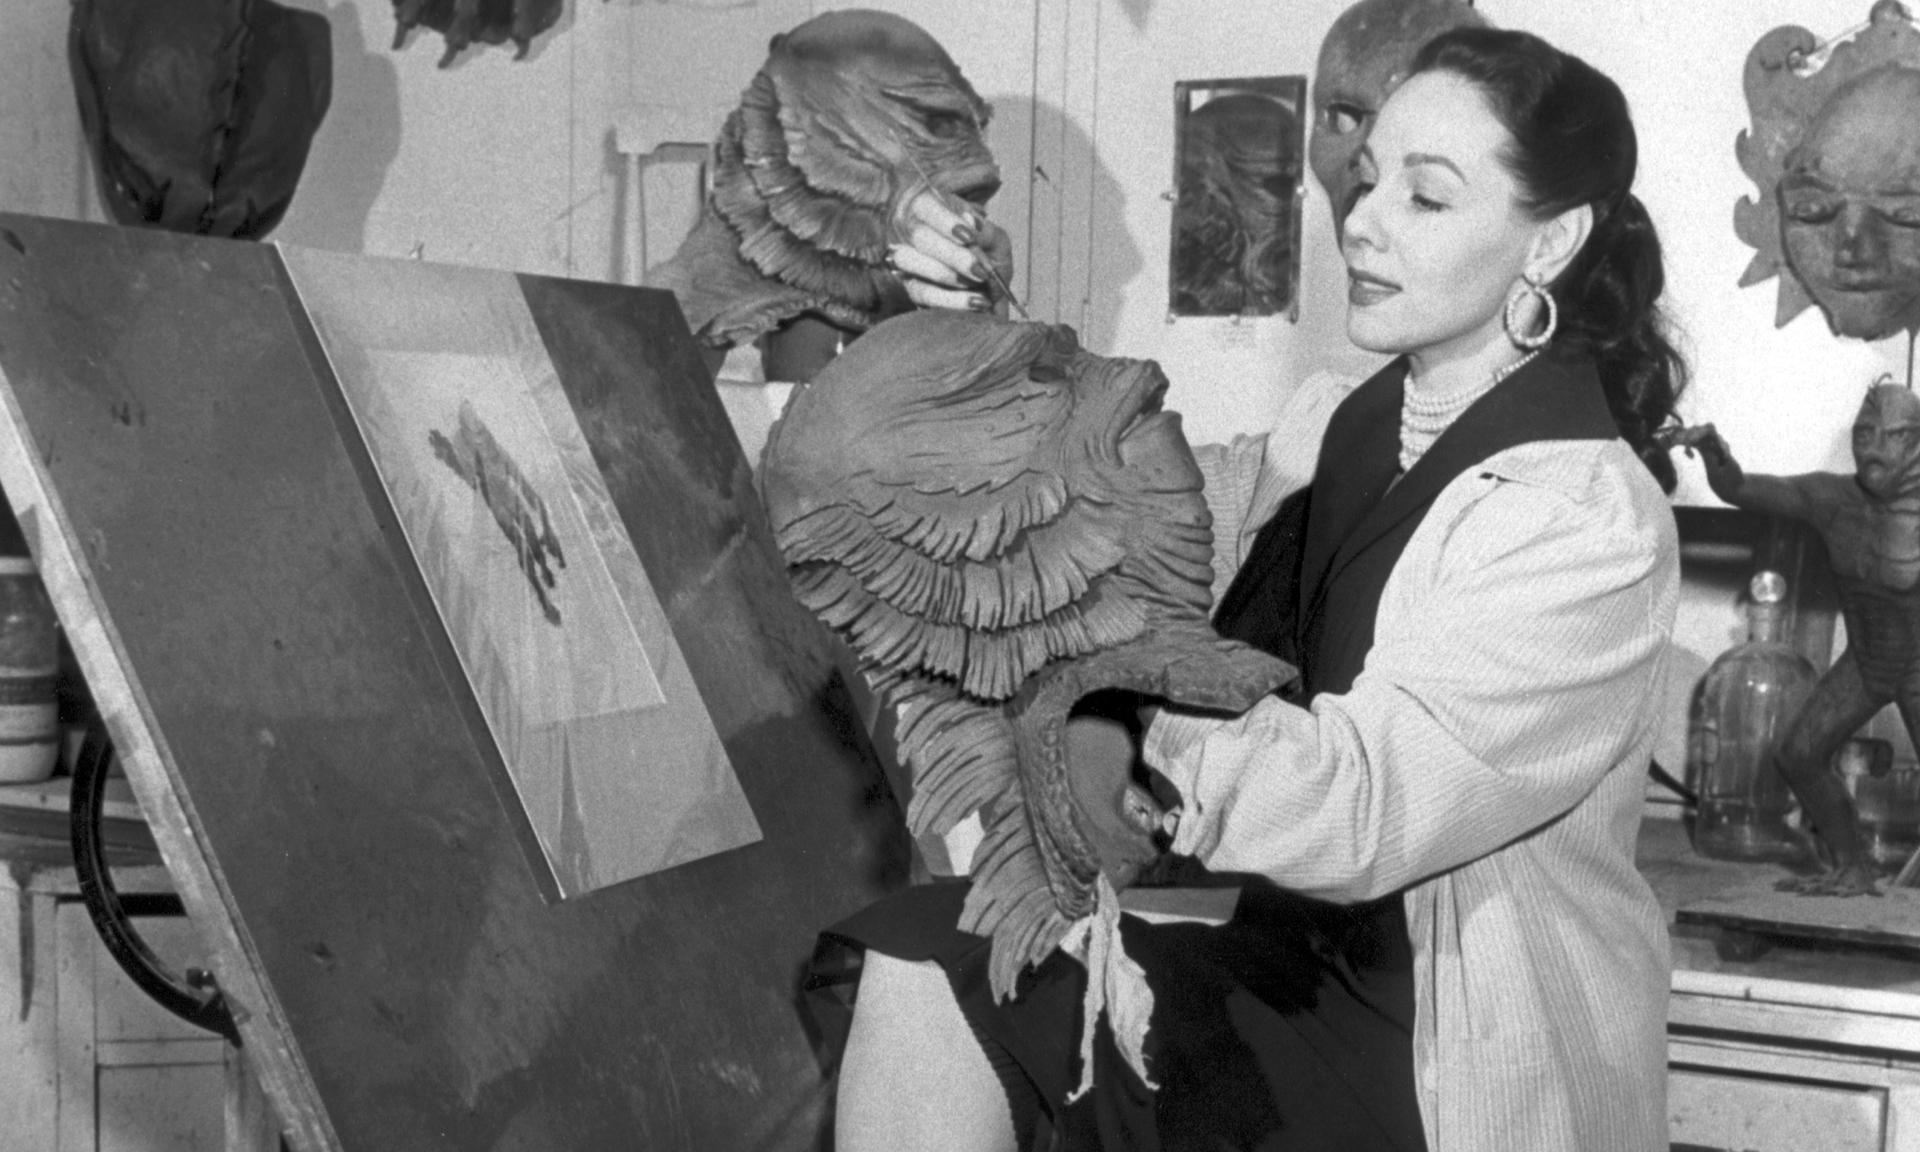 Milicent Patrick in the Universal monster shop.